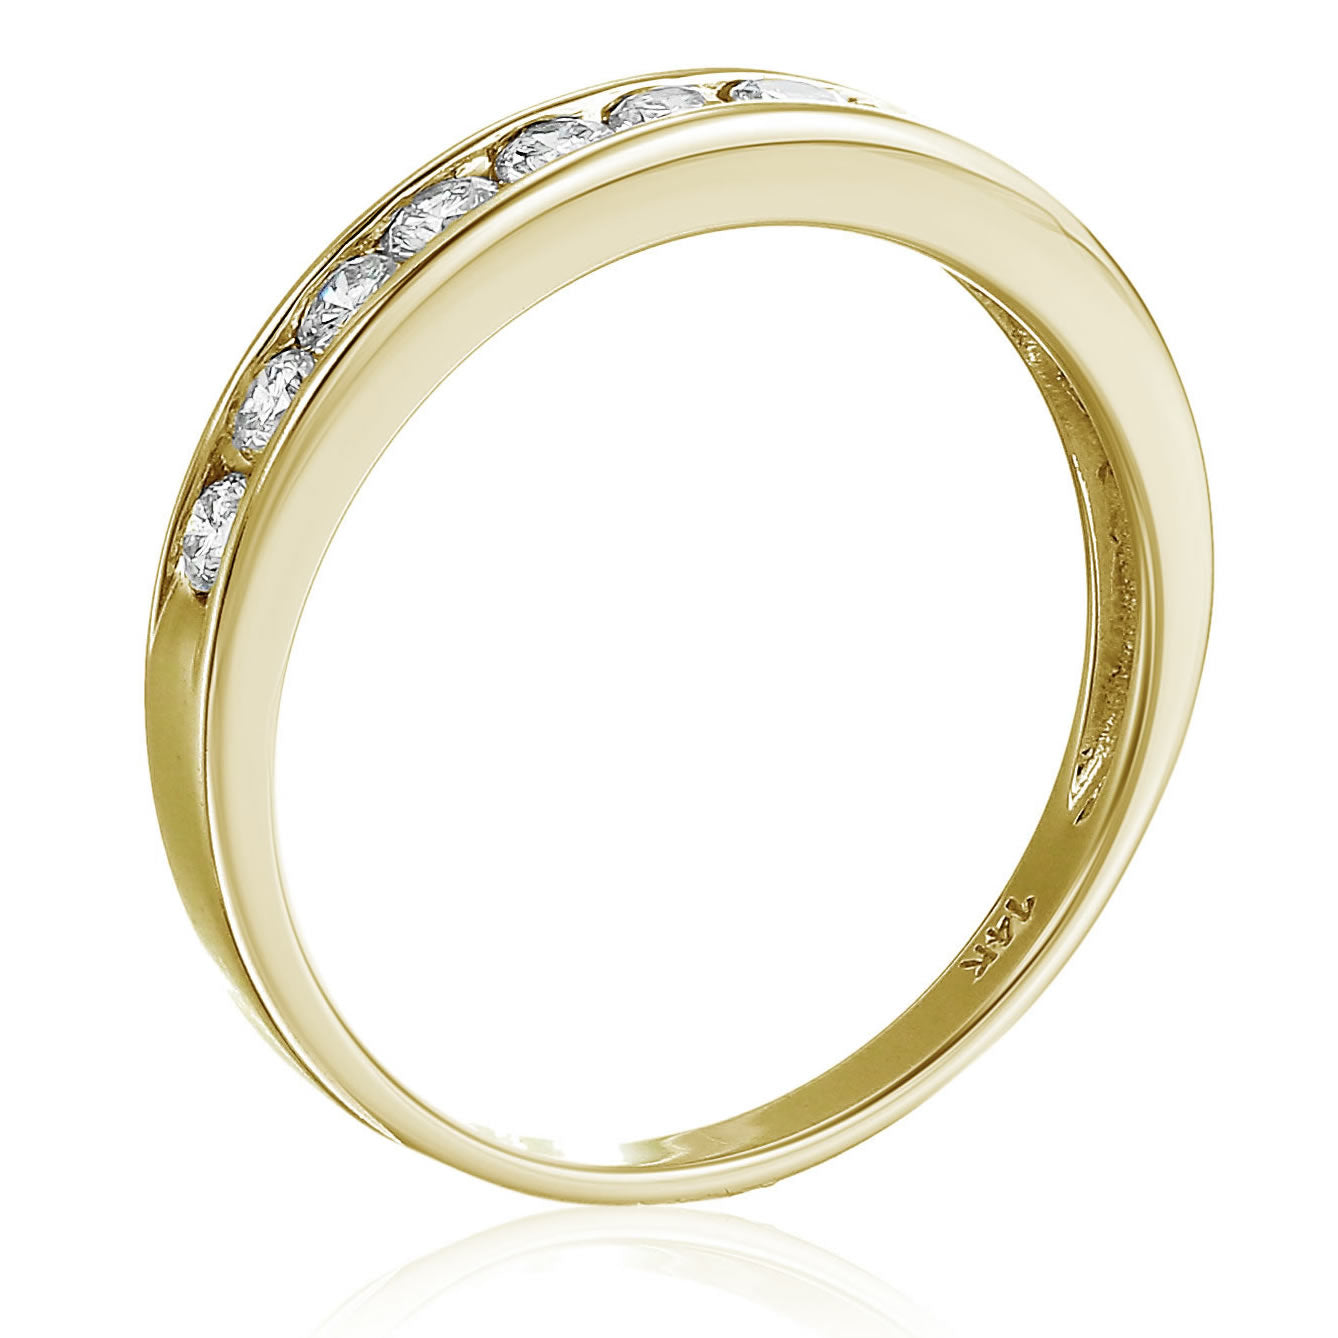 1/2 cttw Diamond Wedding Band For Women, Classic Diamond Wedding Band in 14K Yellow Gold Channel Set, Size 4.5-10